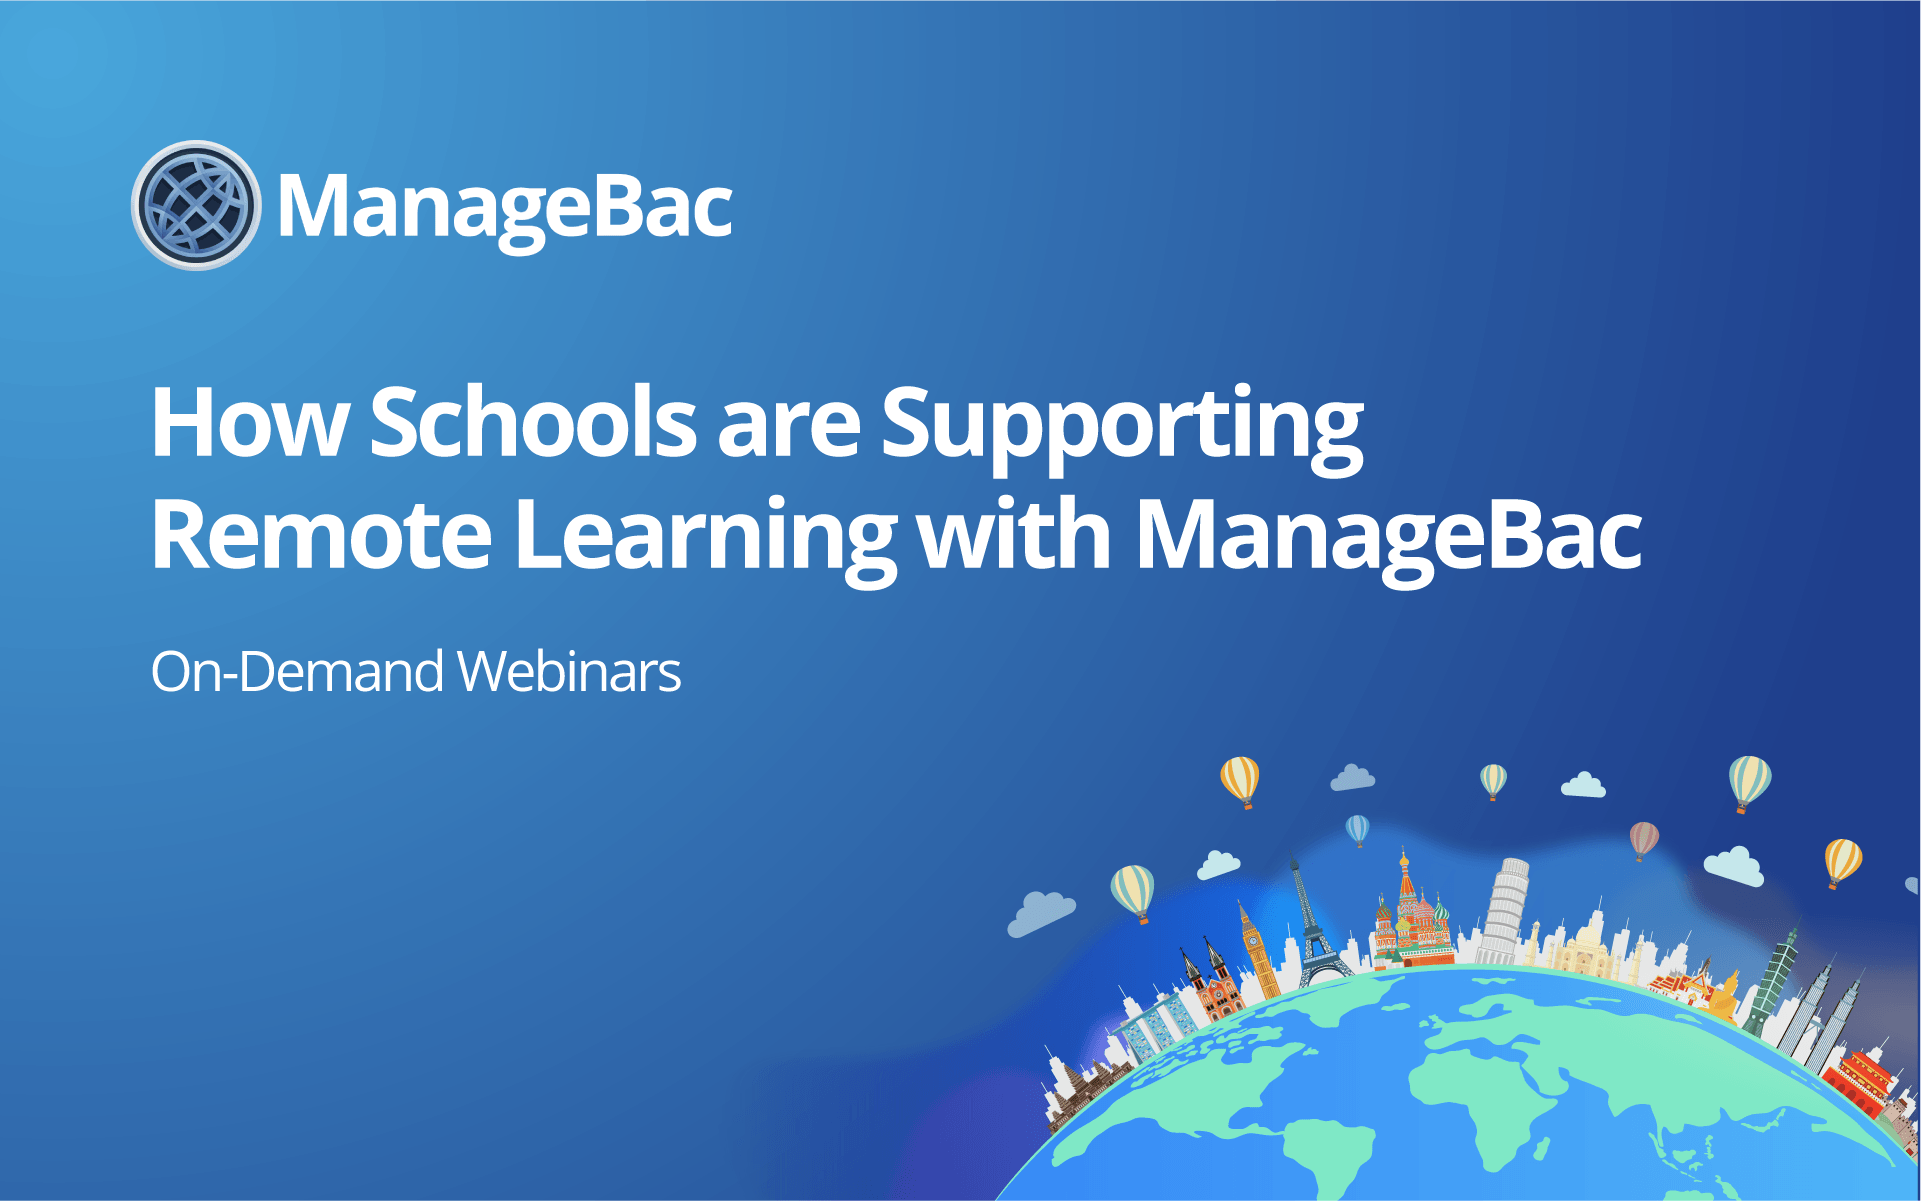 How Schools are Supporting Remote Learning with ManageBac